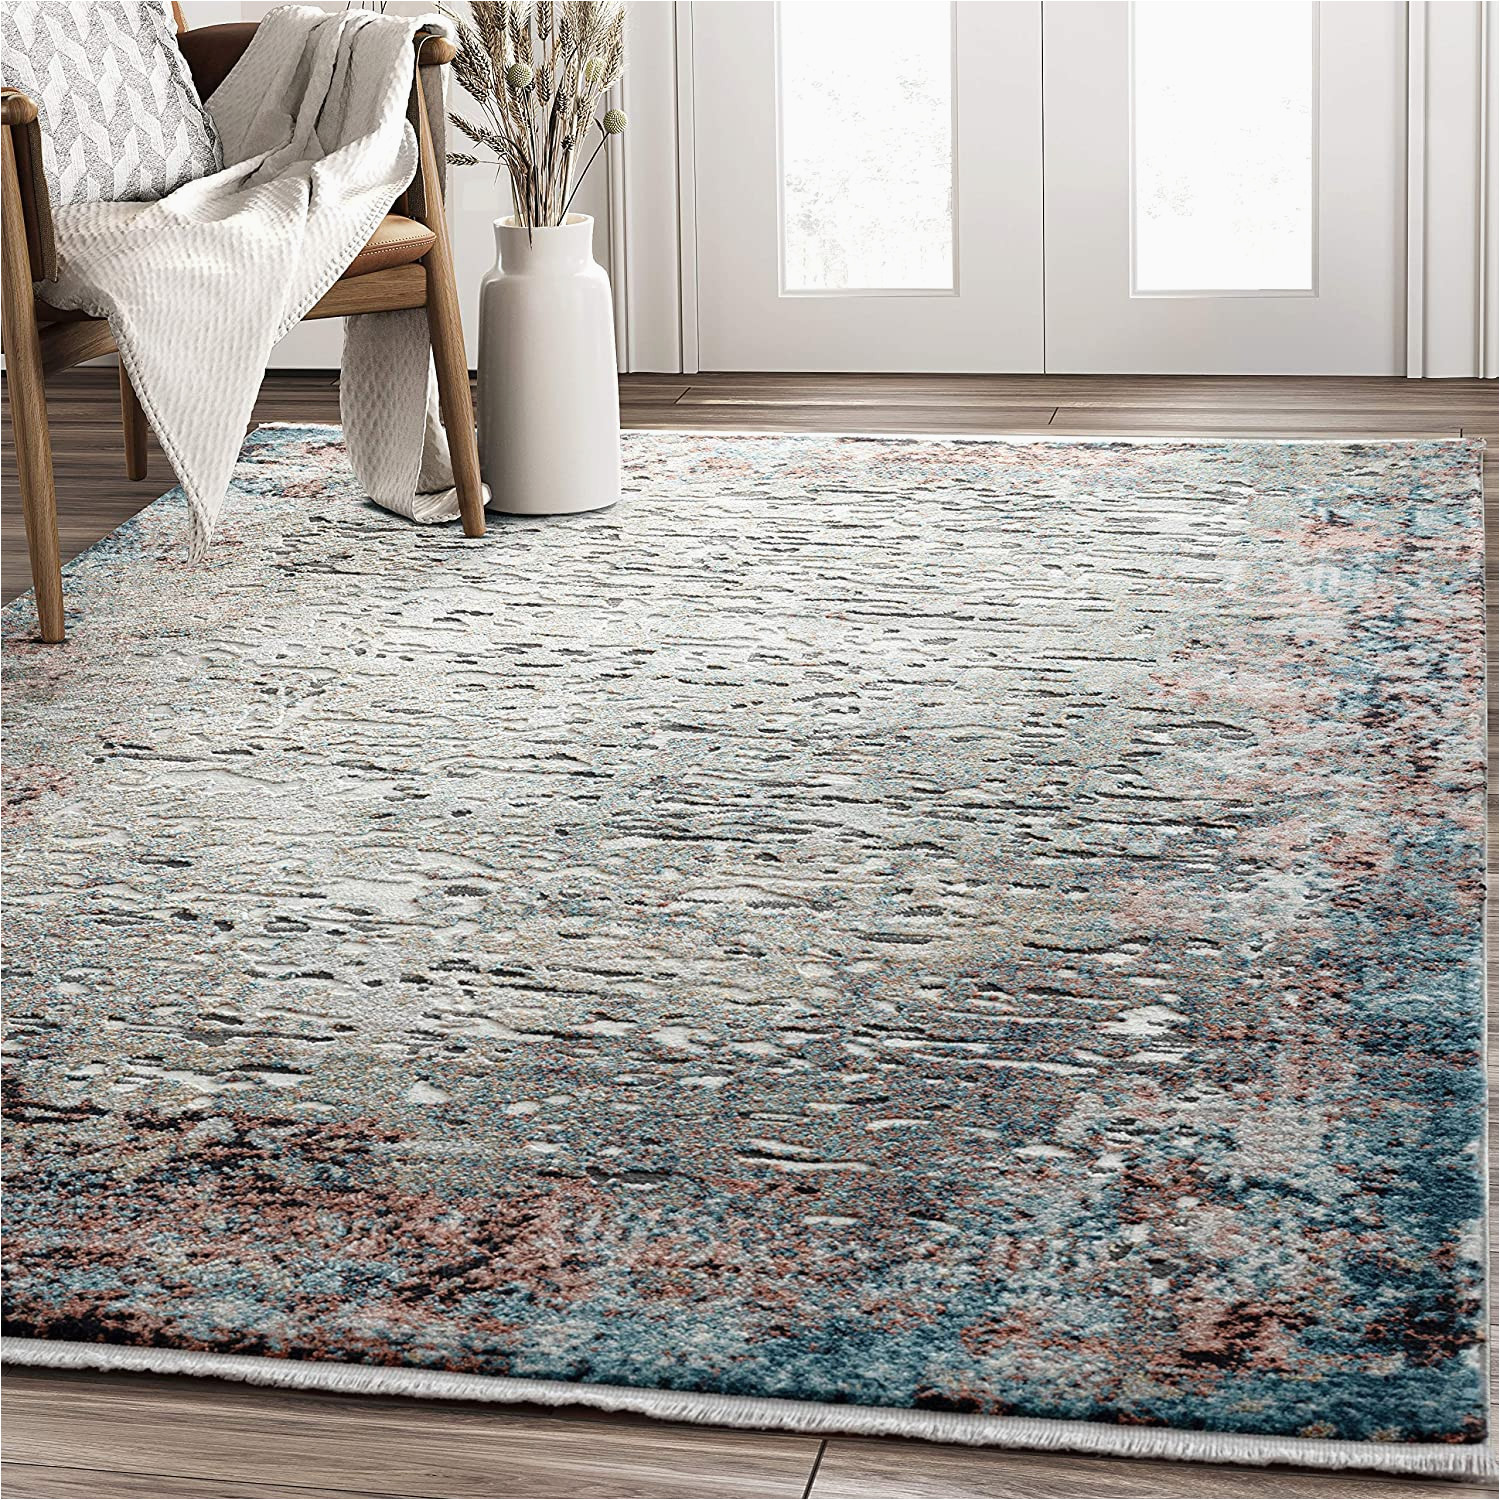 1CRWJZR28 contemporary style abstract 4 x 6 living room area rug modern multicolor distressed carpet by abani rugs